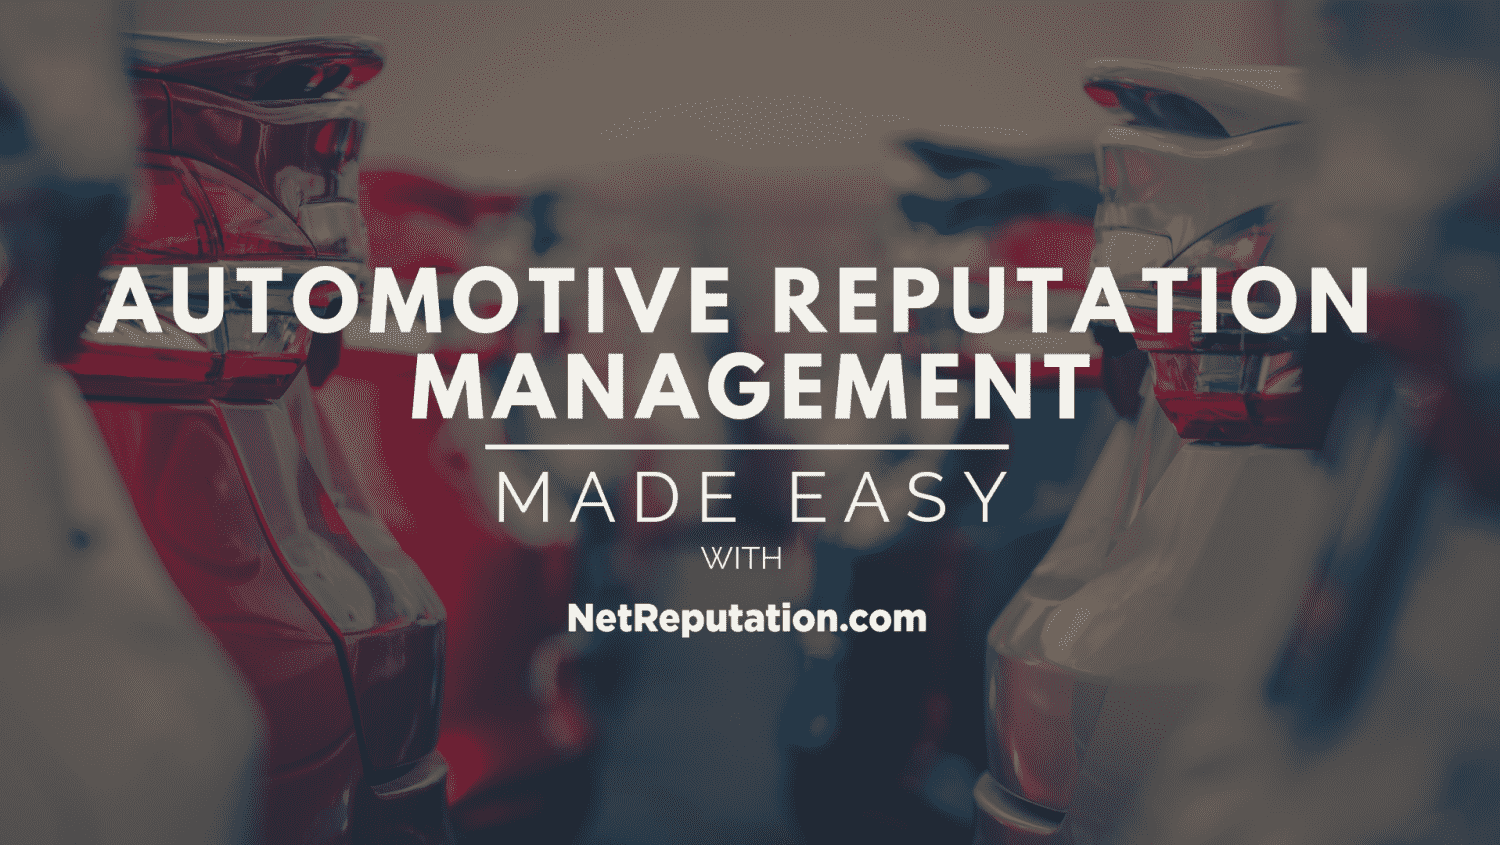 Automotive Reputation Management Made Easy featured